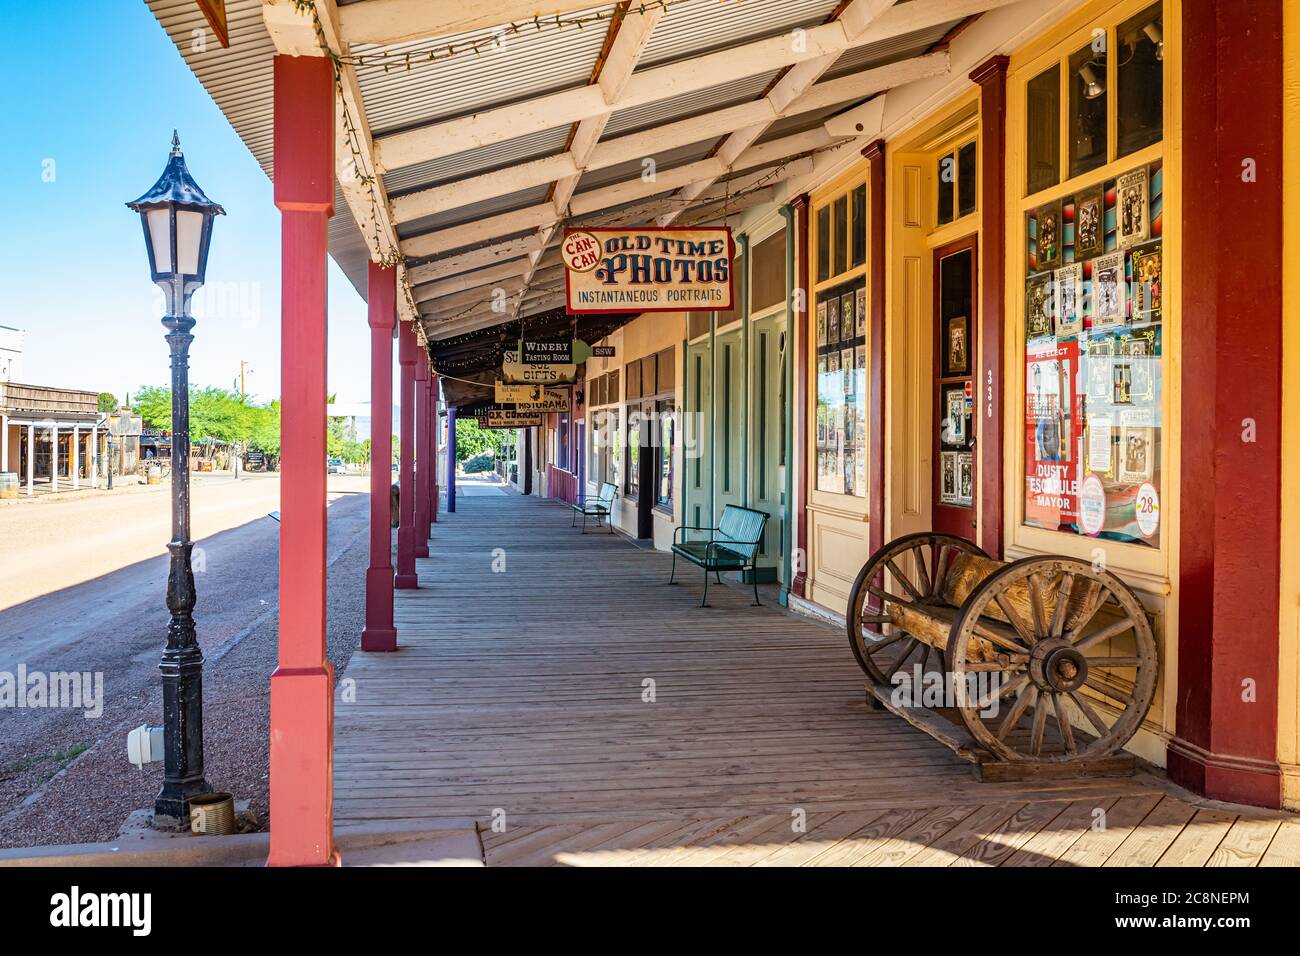 Tombstone, Arizona, USA - March 2, 2019: Morning view of Allen Street in the famous Old West Town Historic District Stock Photo